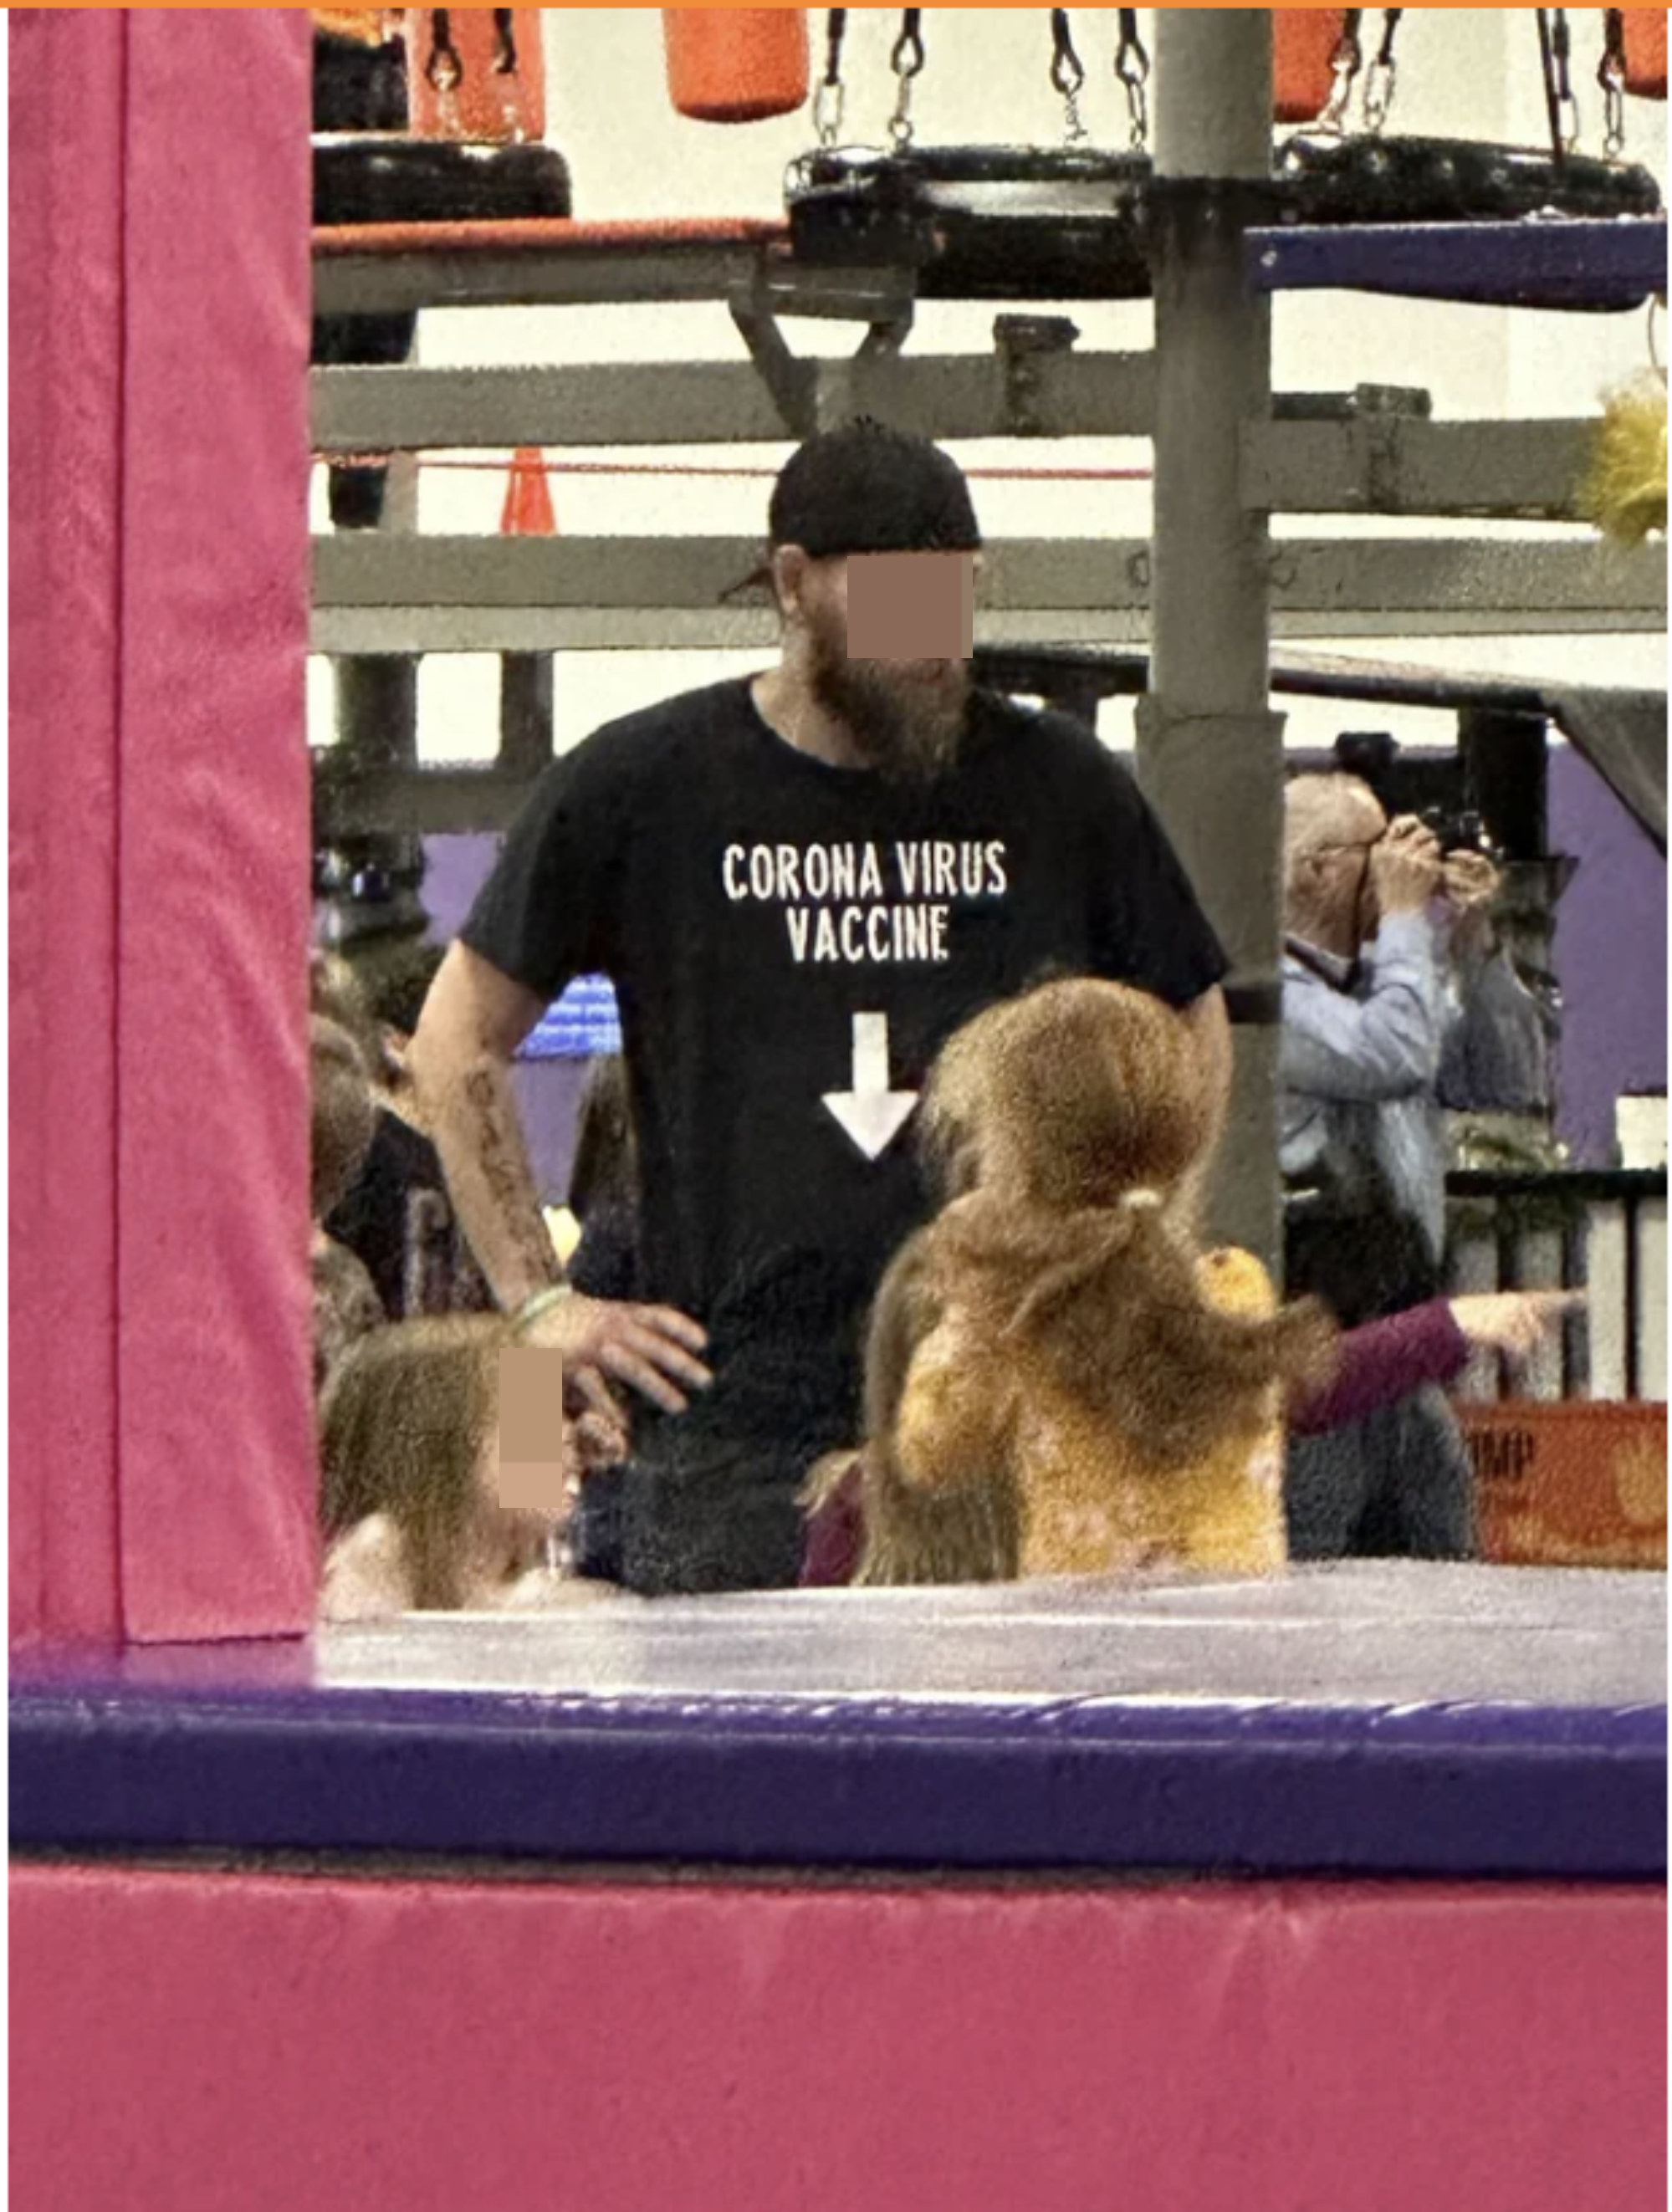 A man wearing a shirt that says &quot;Coronavirus Vaccine&quot; with an arrow pointing downward